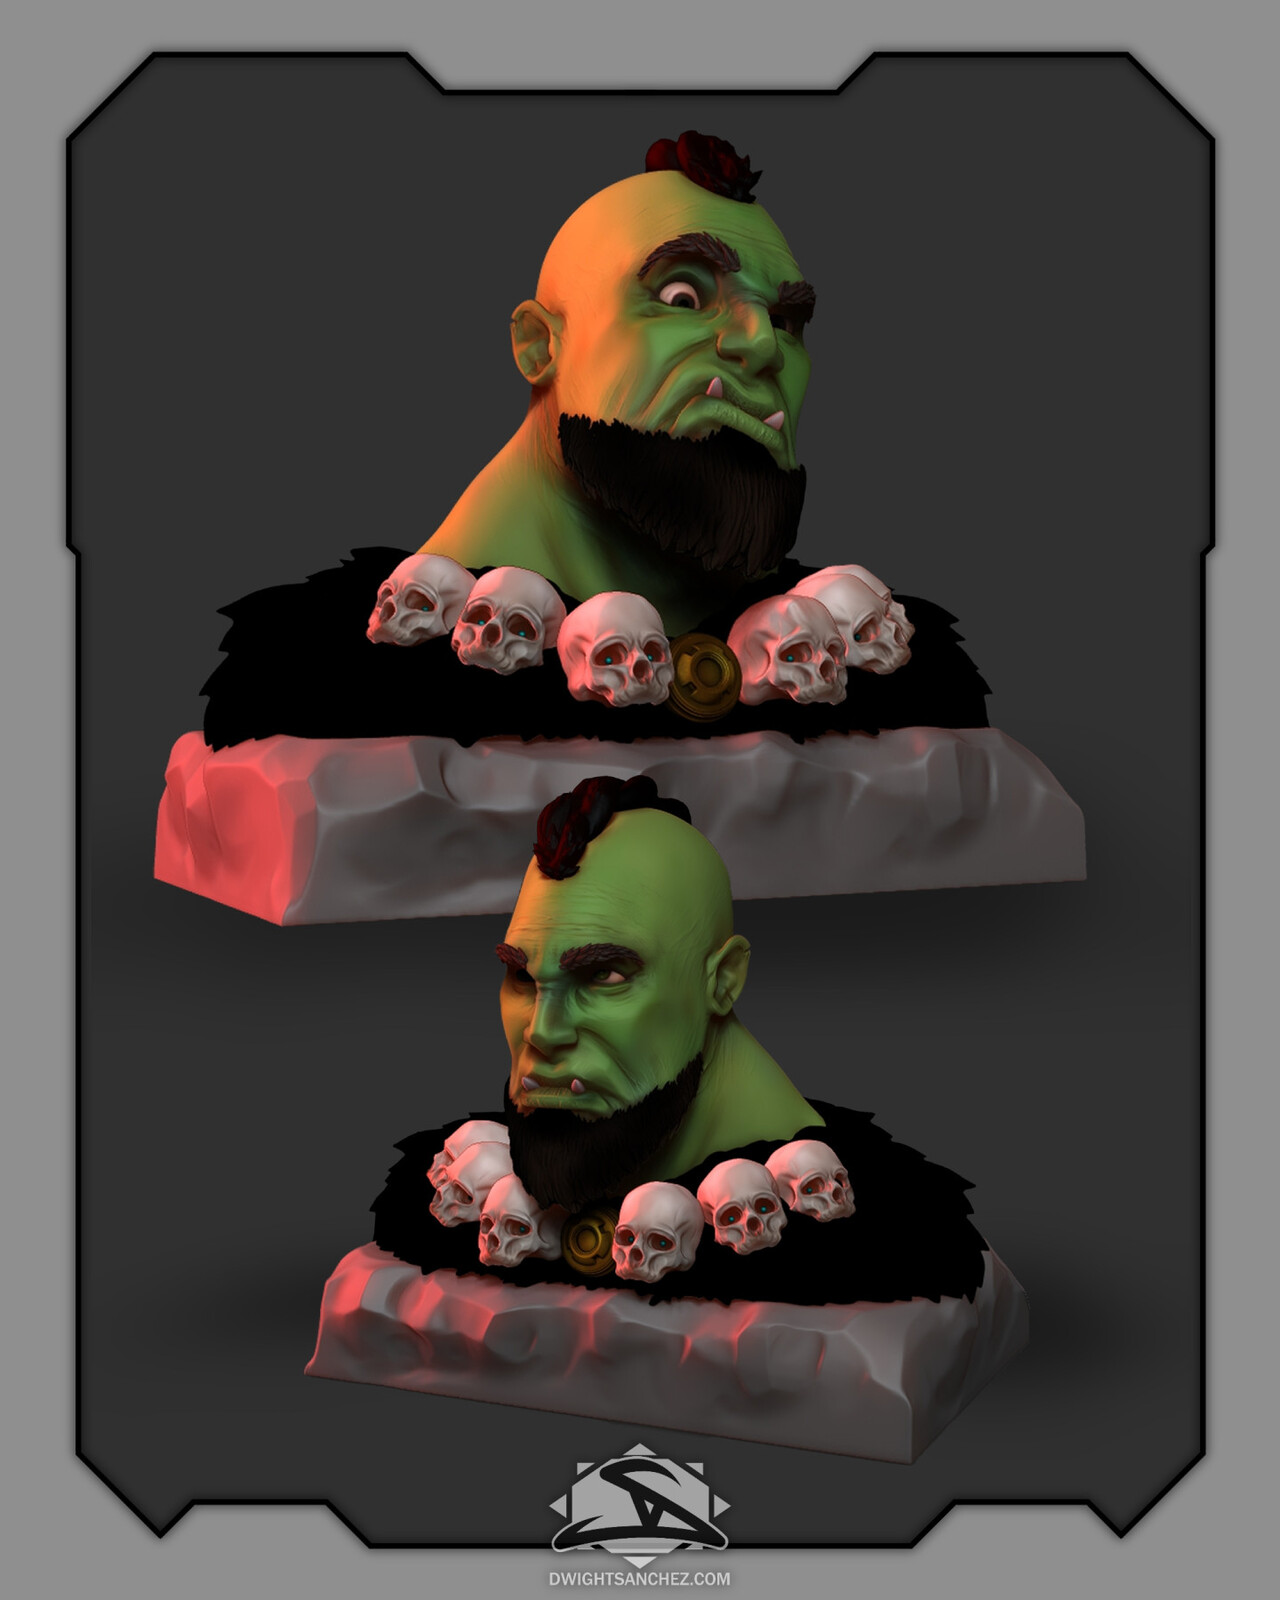 Mr. Orc